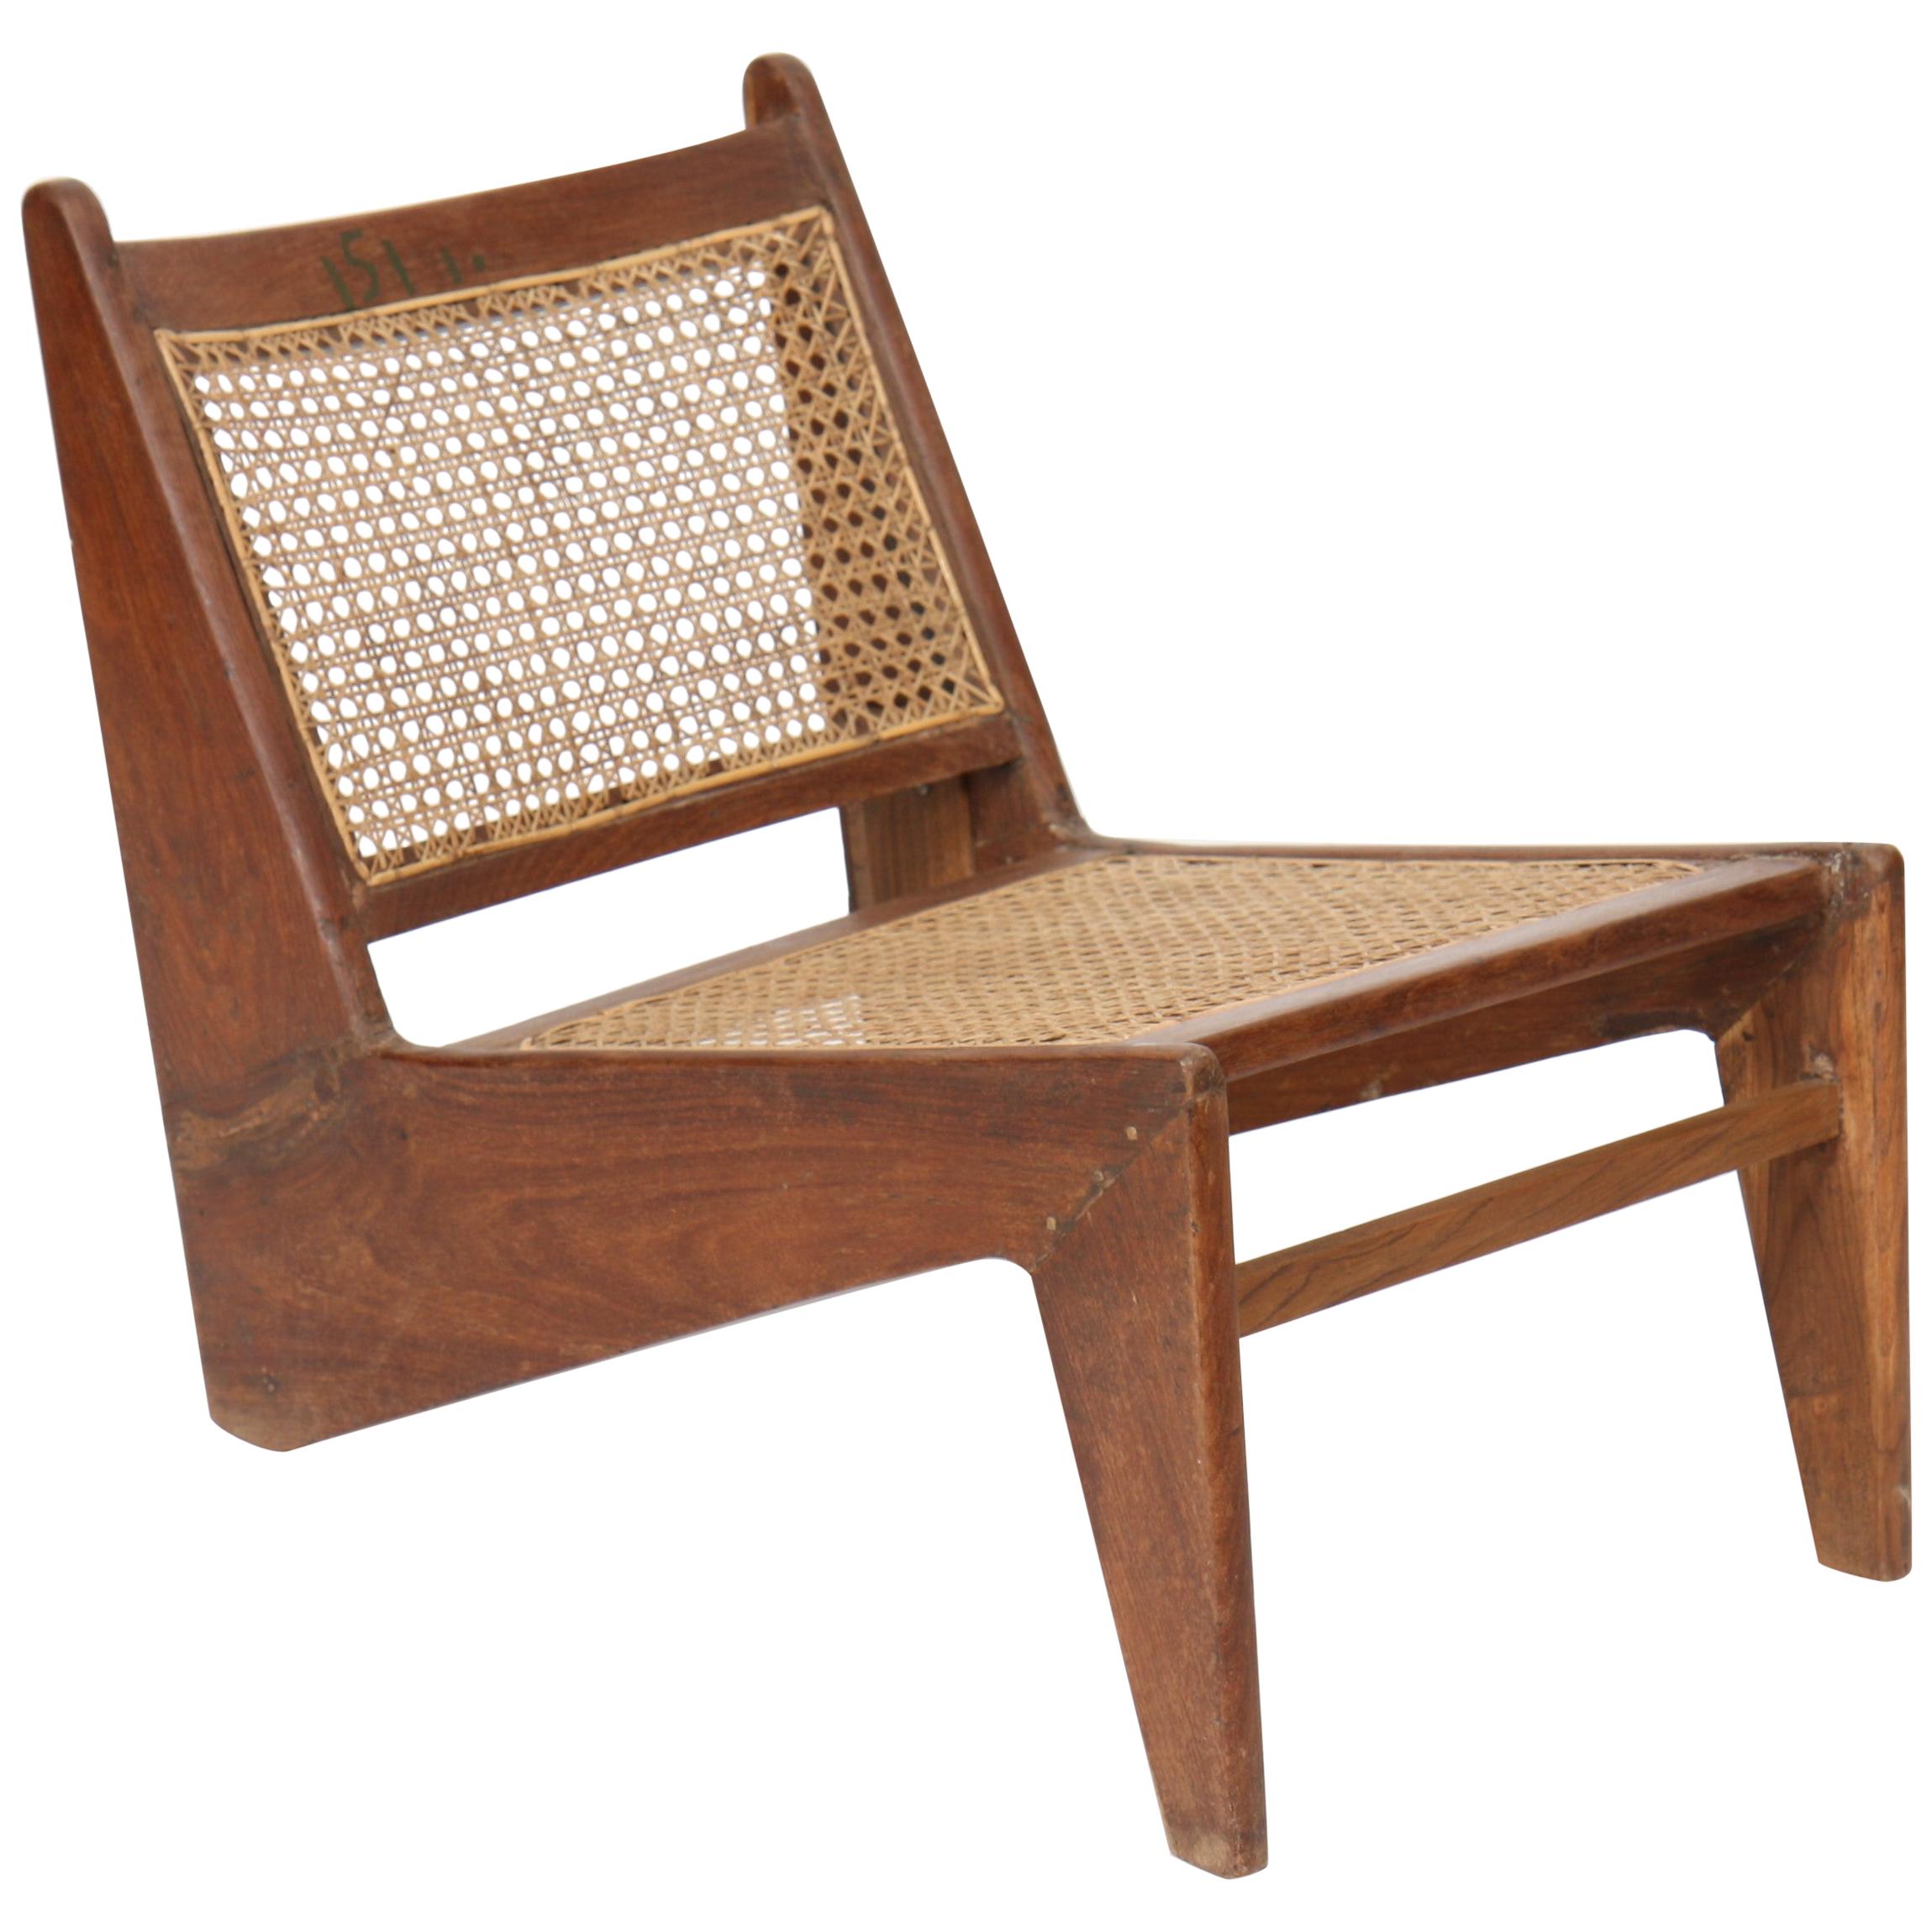 Rare and Exceptional "Kangourou" Chair by Pierre Jeanneret, 1896-1967